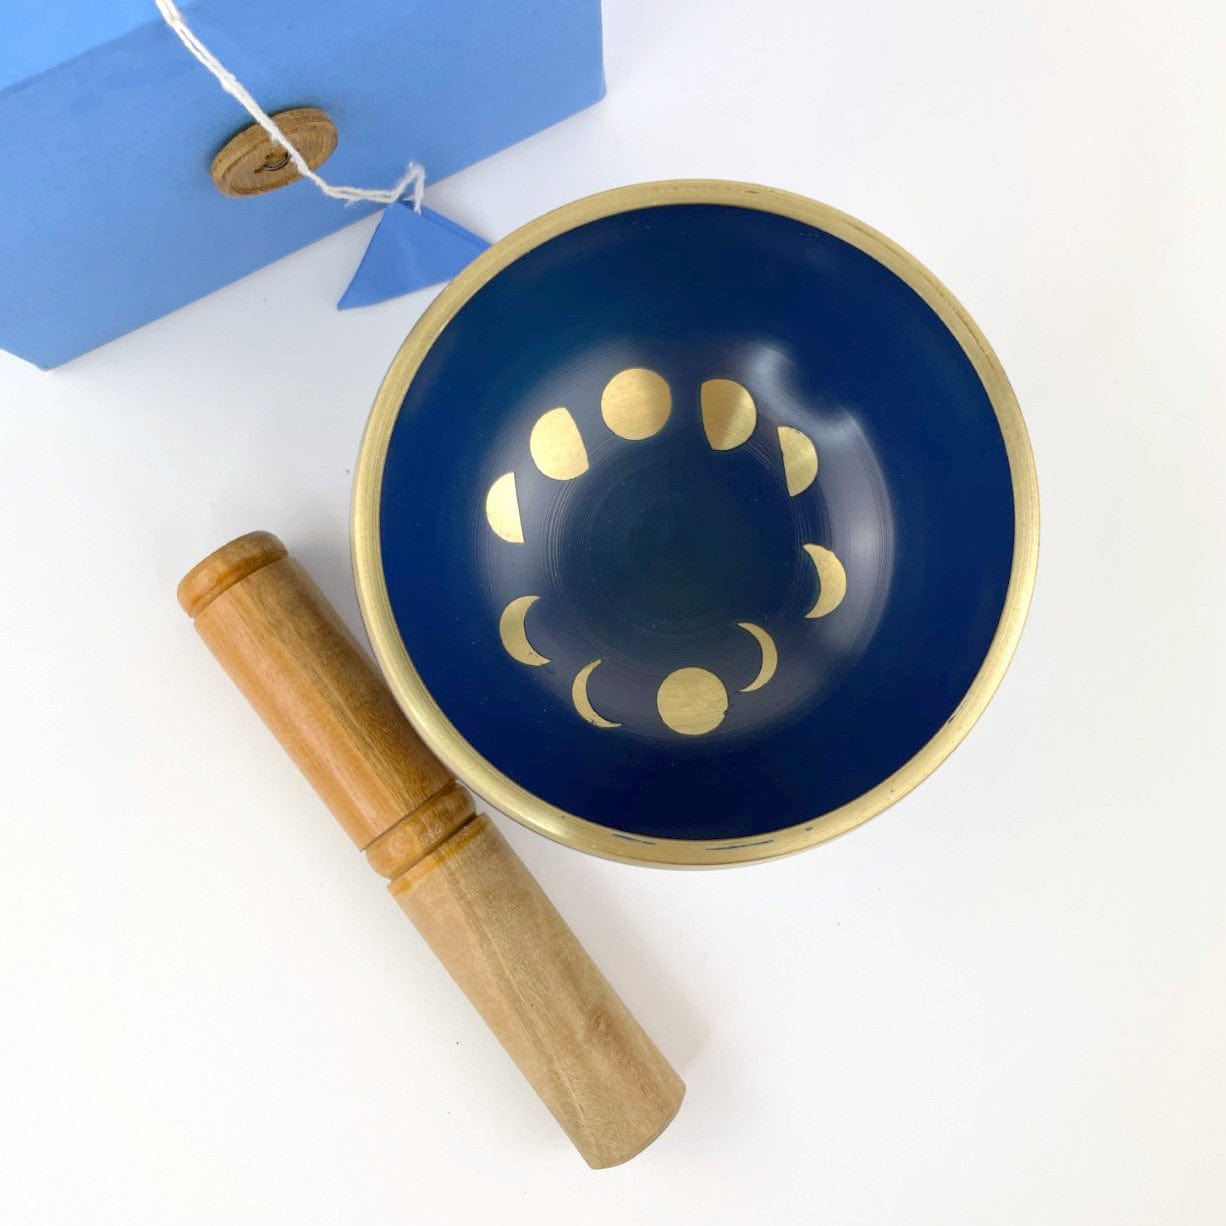 top view of blue singing bowl with moon phase design in gold.